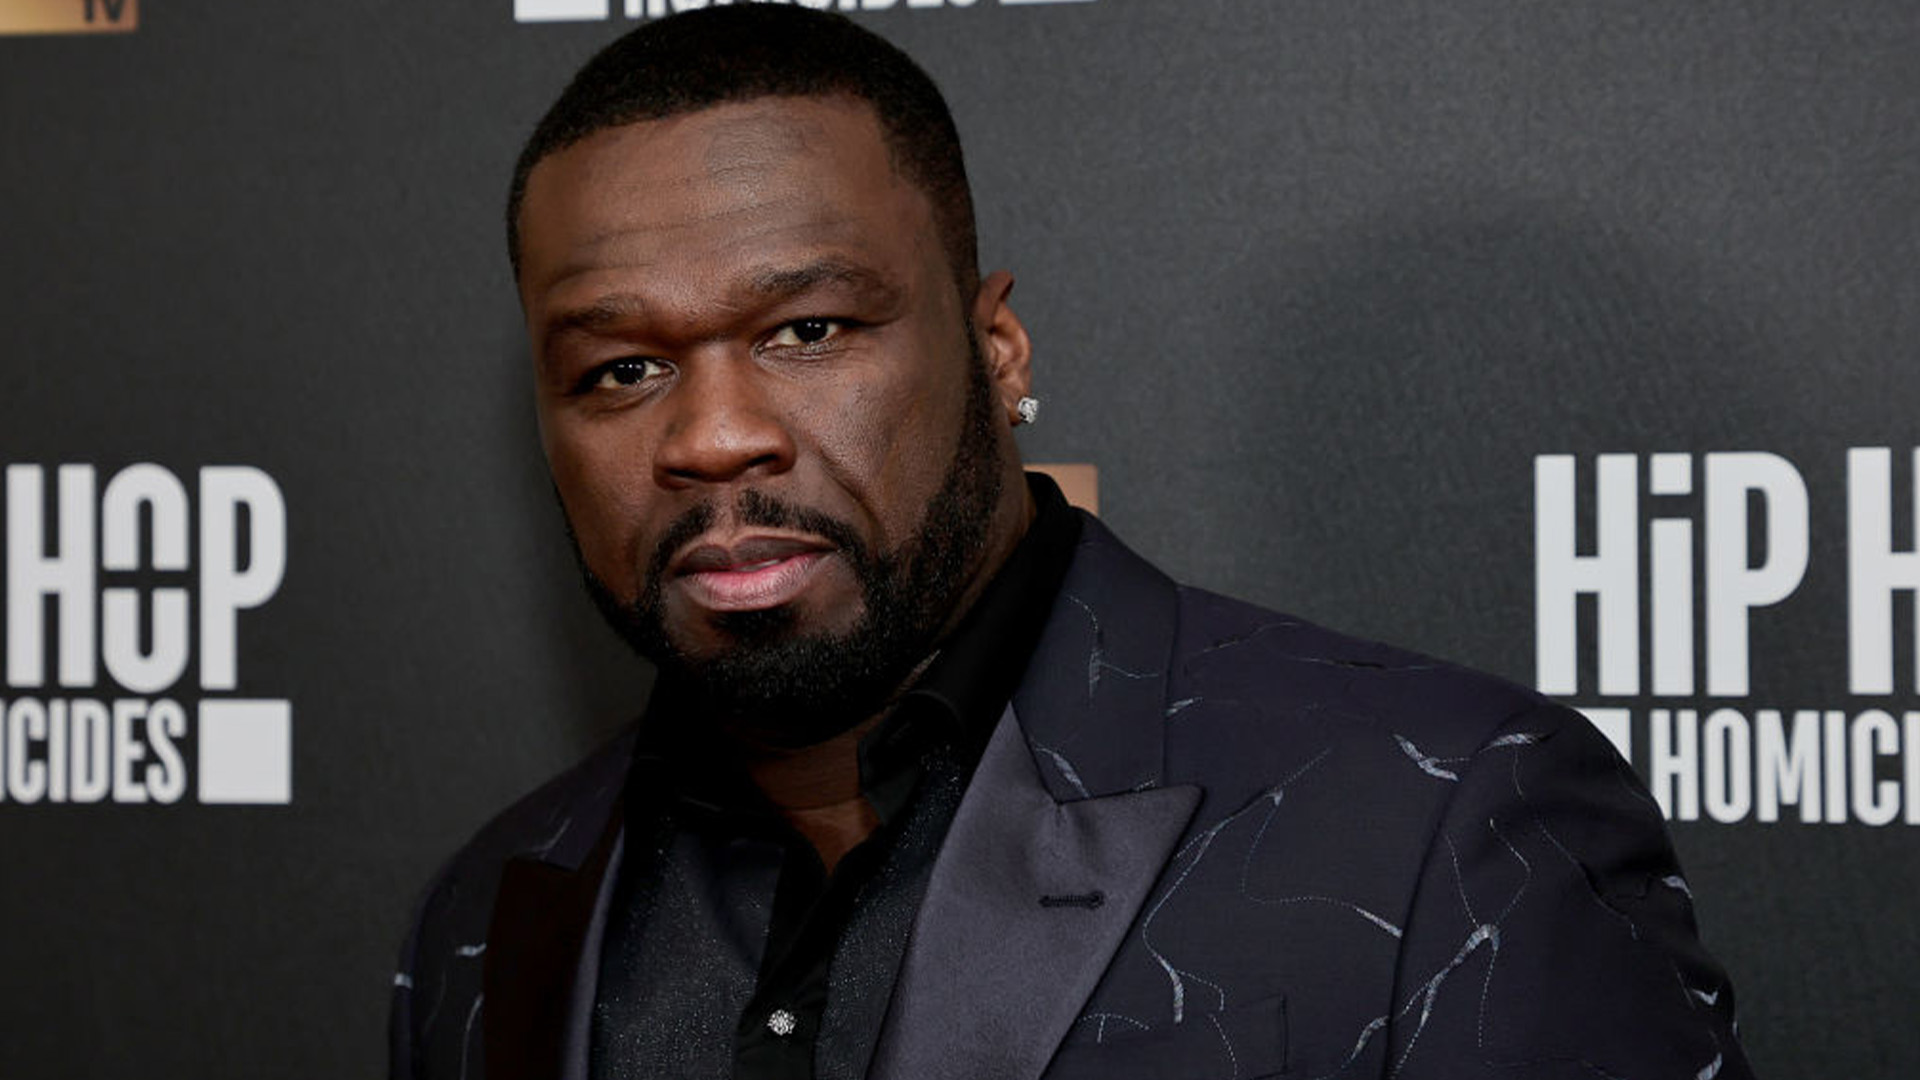 50 Cent Recalls Having $38M In His Account With An Apartment That Was $800 A Month